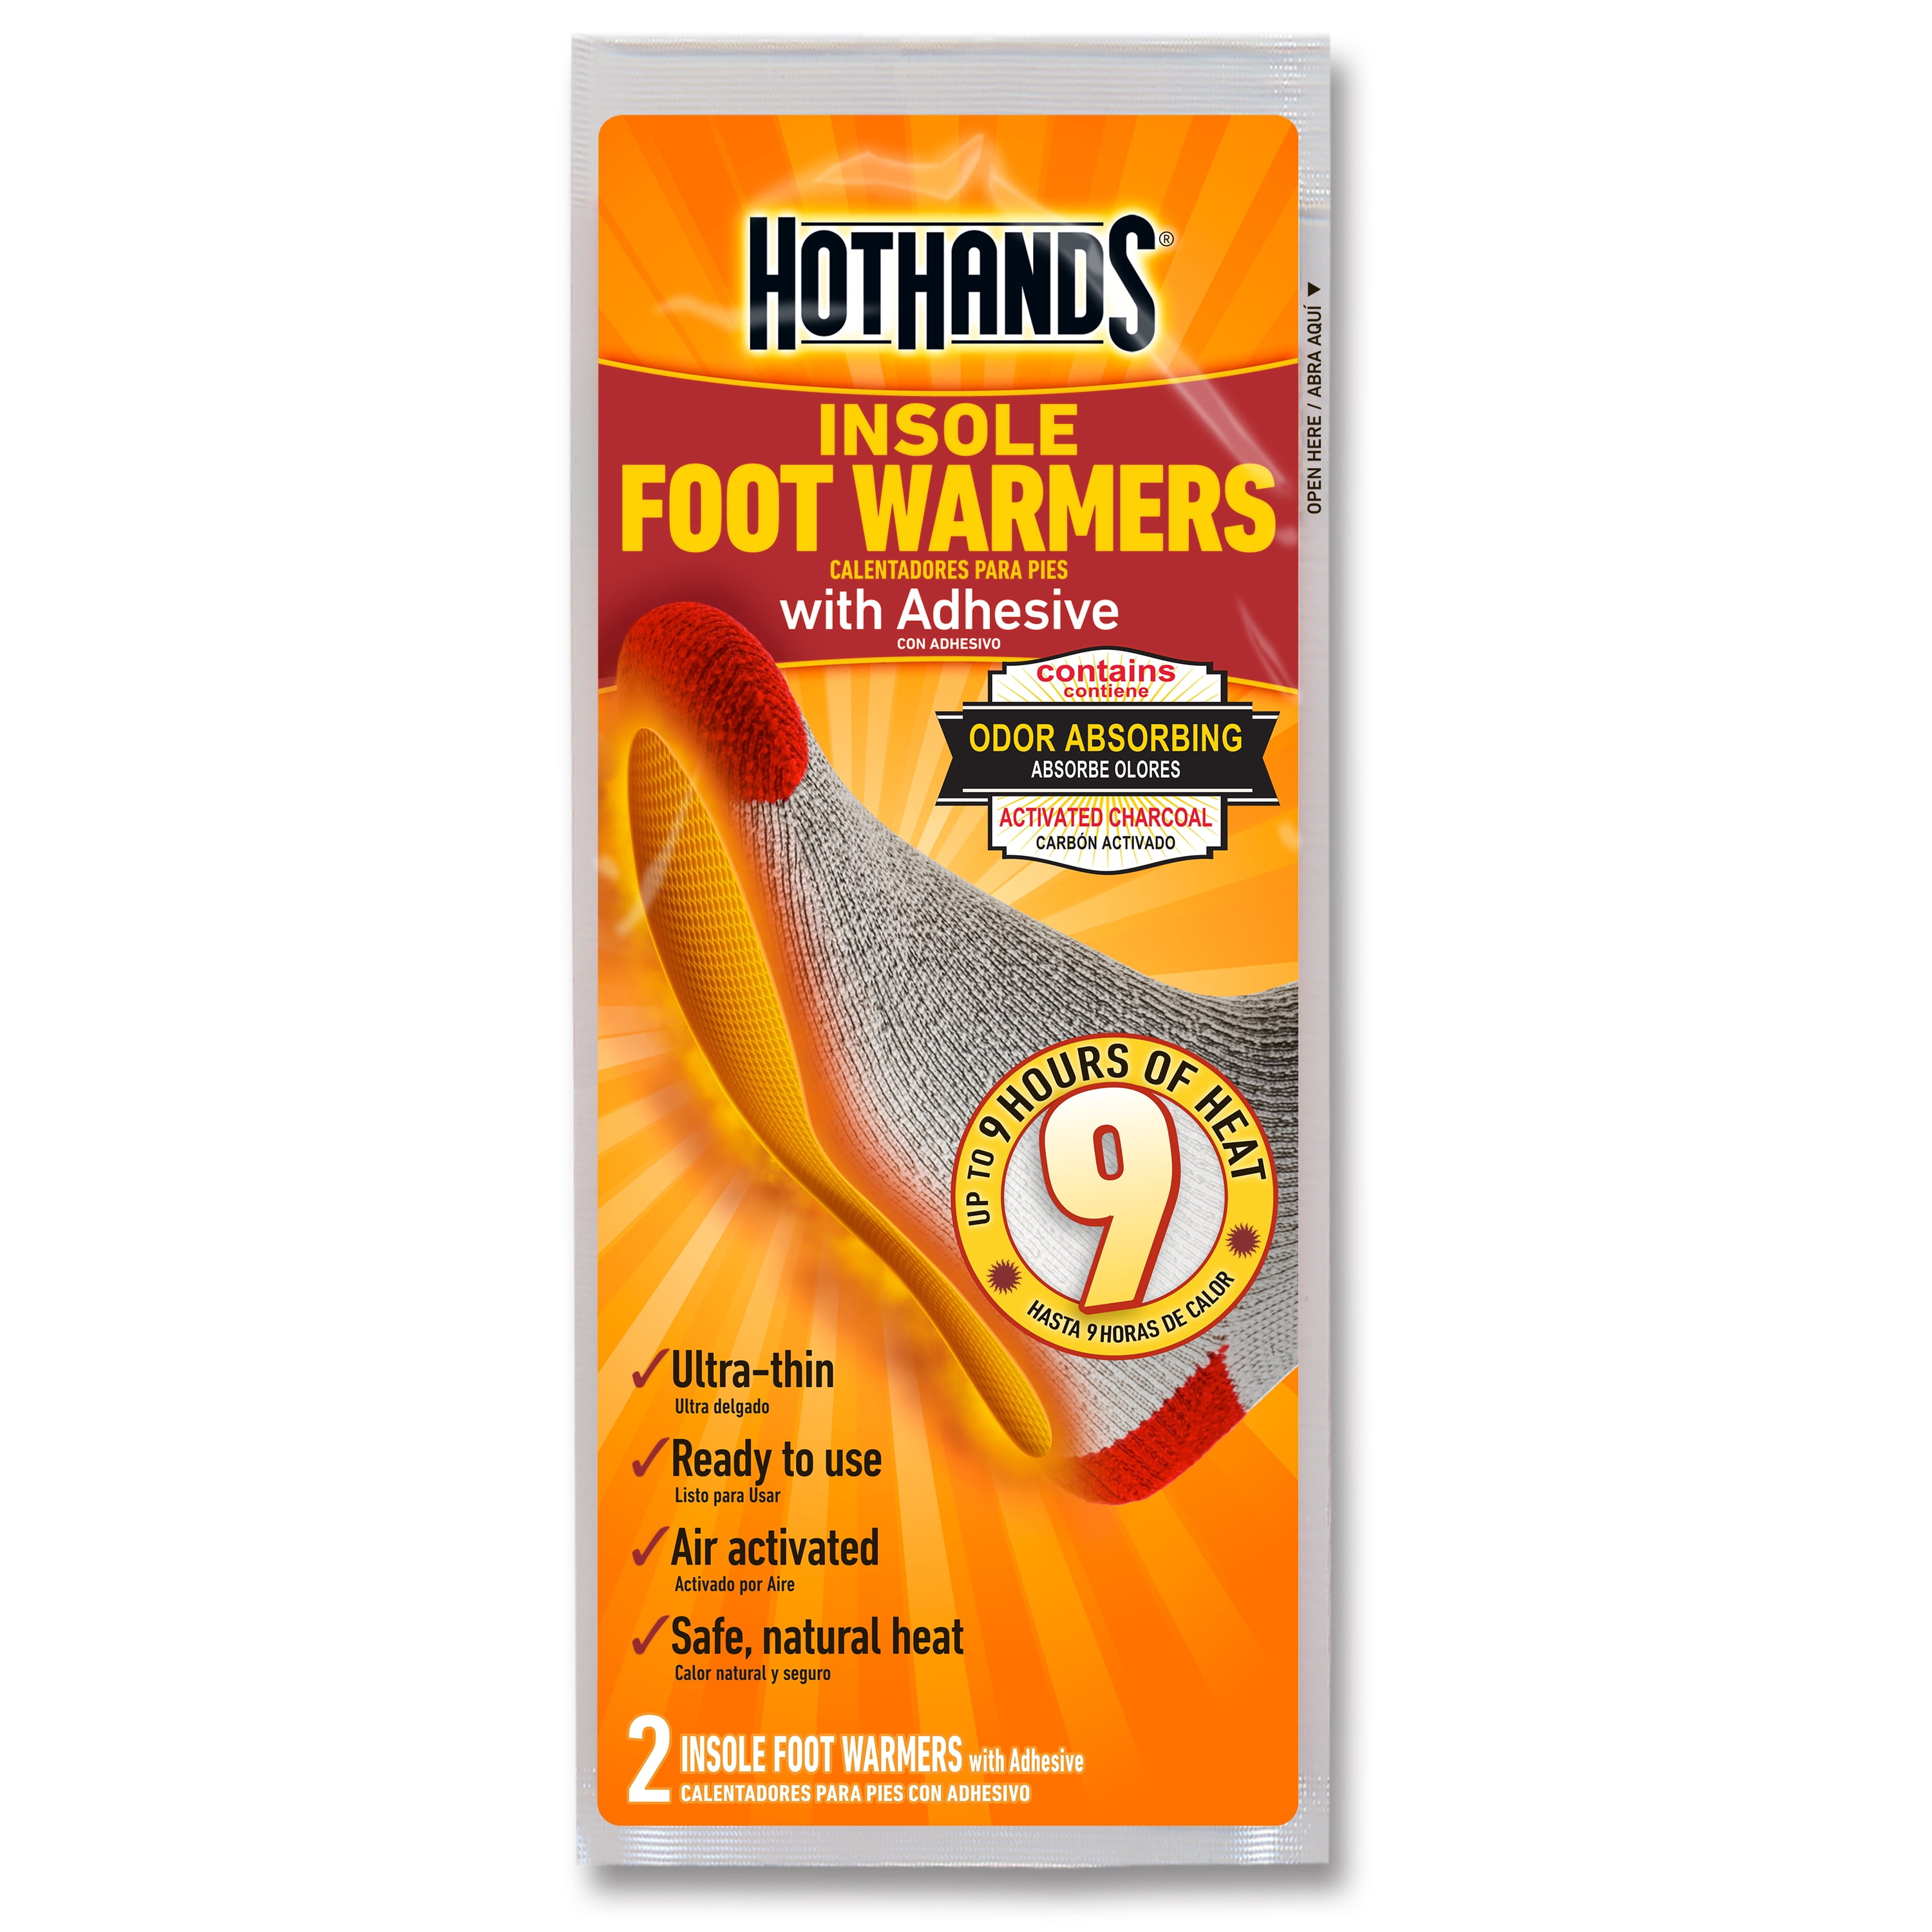 HotHands Toe Warmers with adhesive 2 pair Lot of 10 